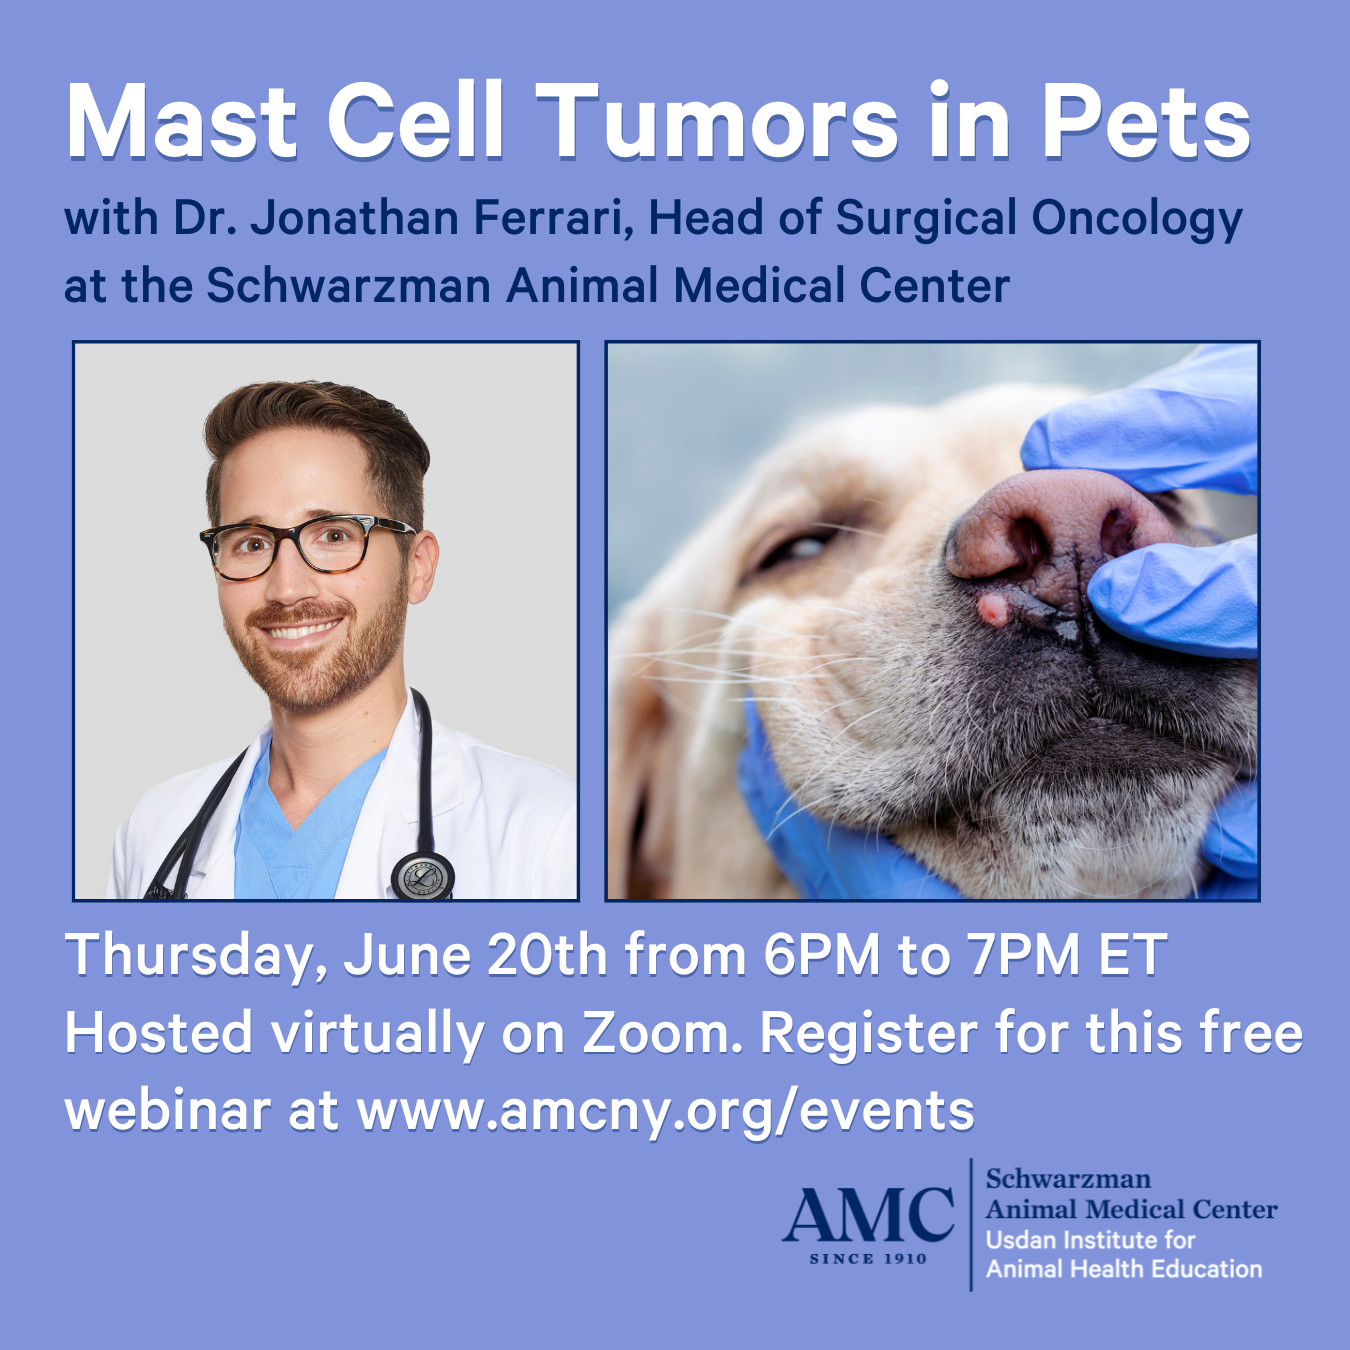 Mast Cell Tumors in Pets graphic with headshot of Dr. Jonathan Ferrari and photo of dog with a mast cell tumor below its nose.